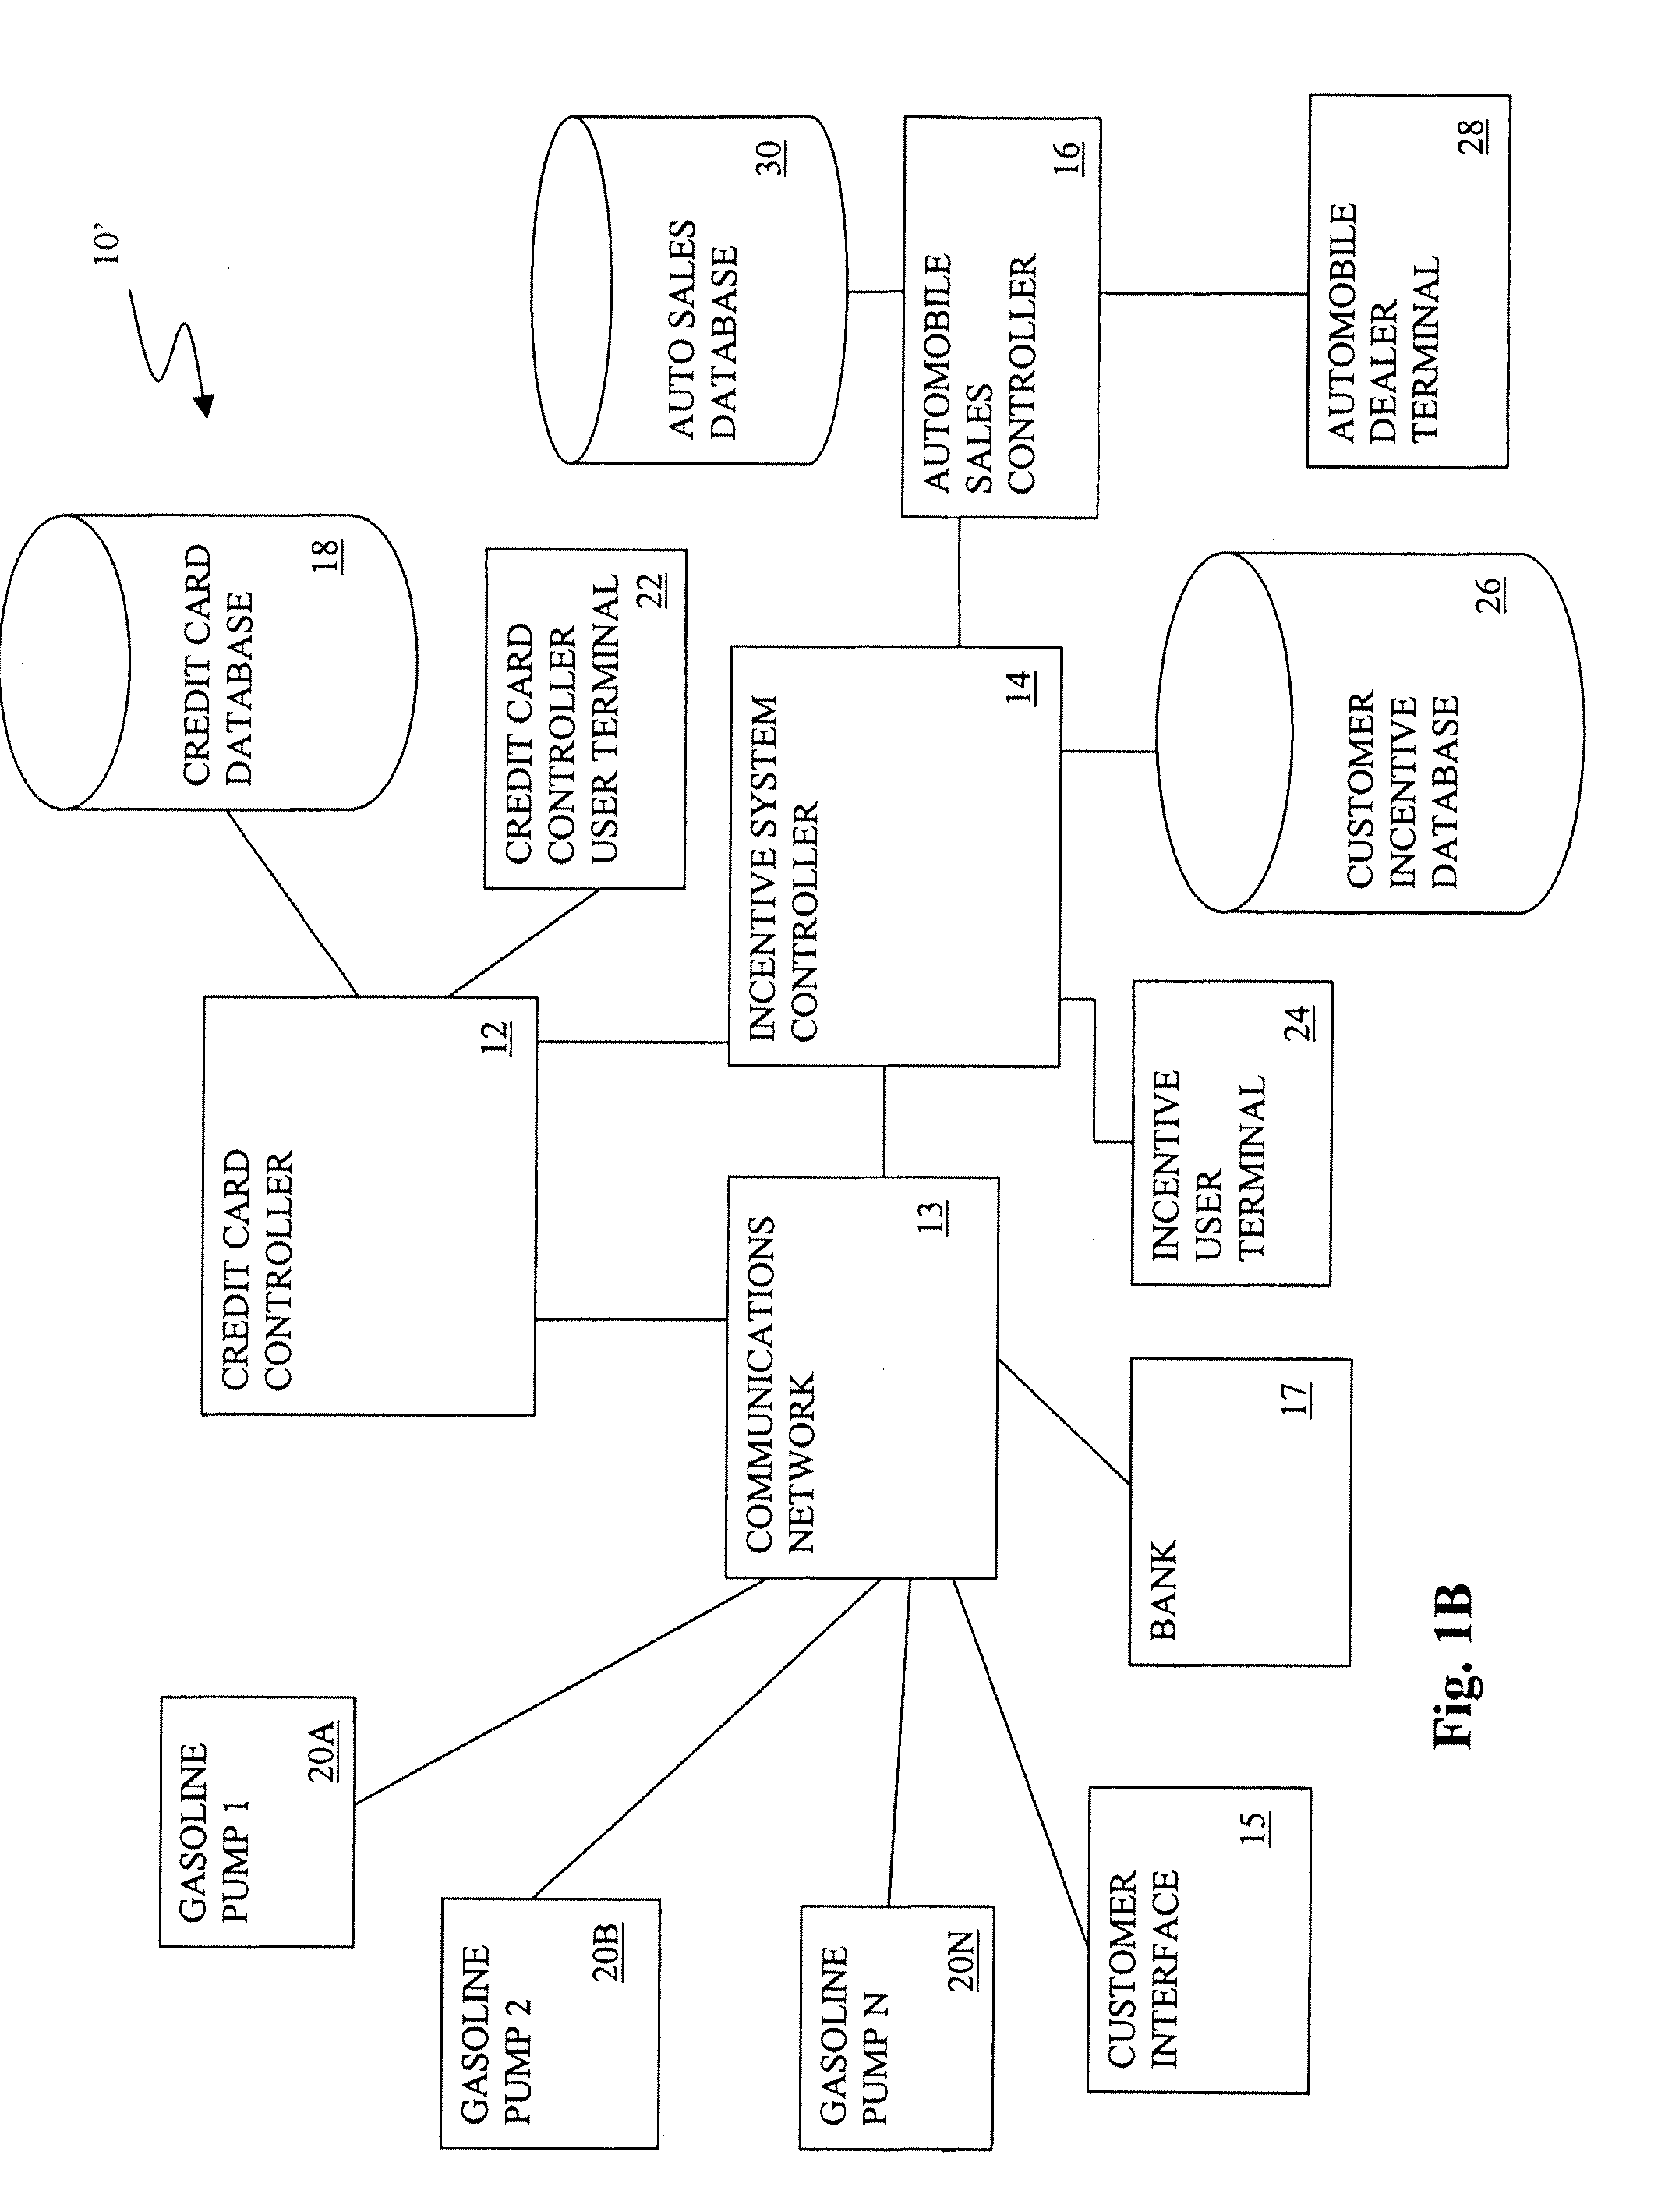 System and method for providing a fuel purchase incentive with the sale of a vehicle